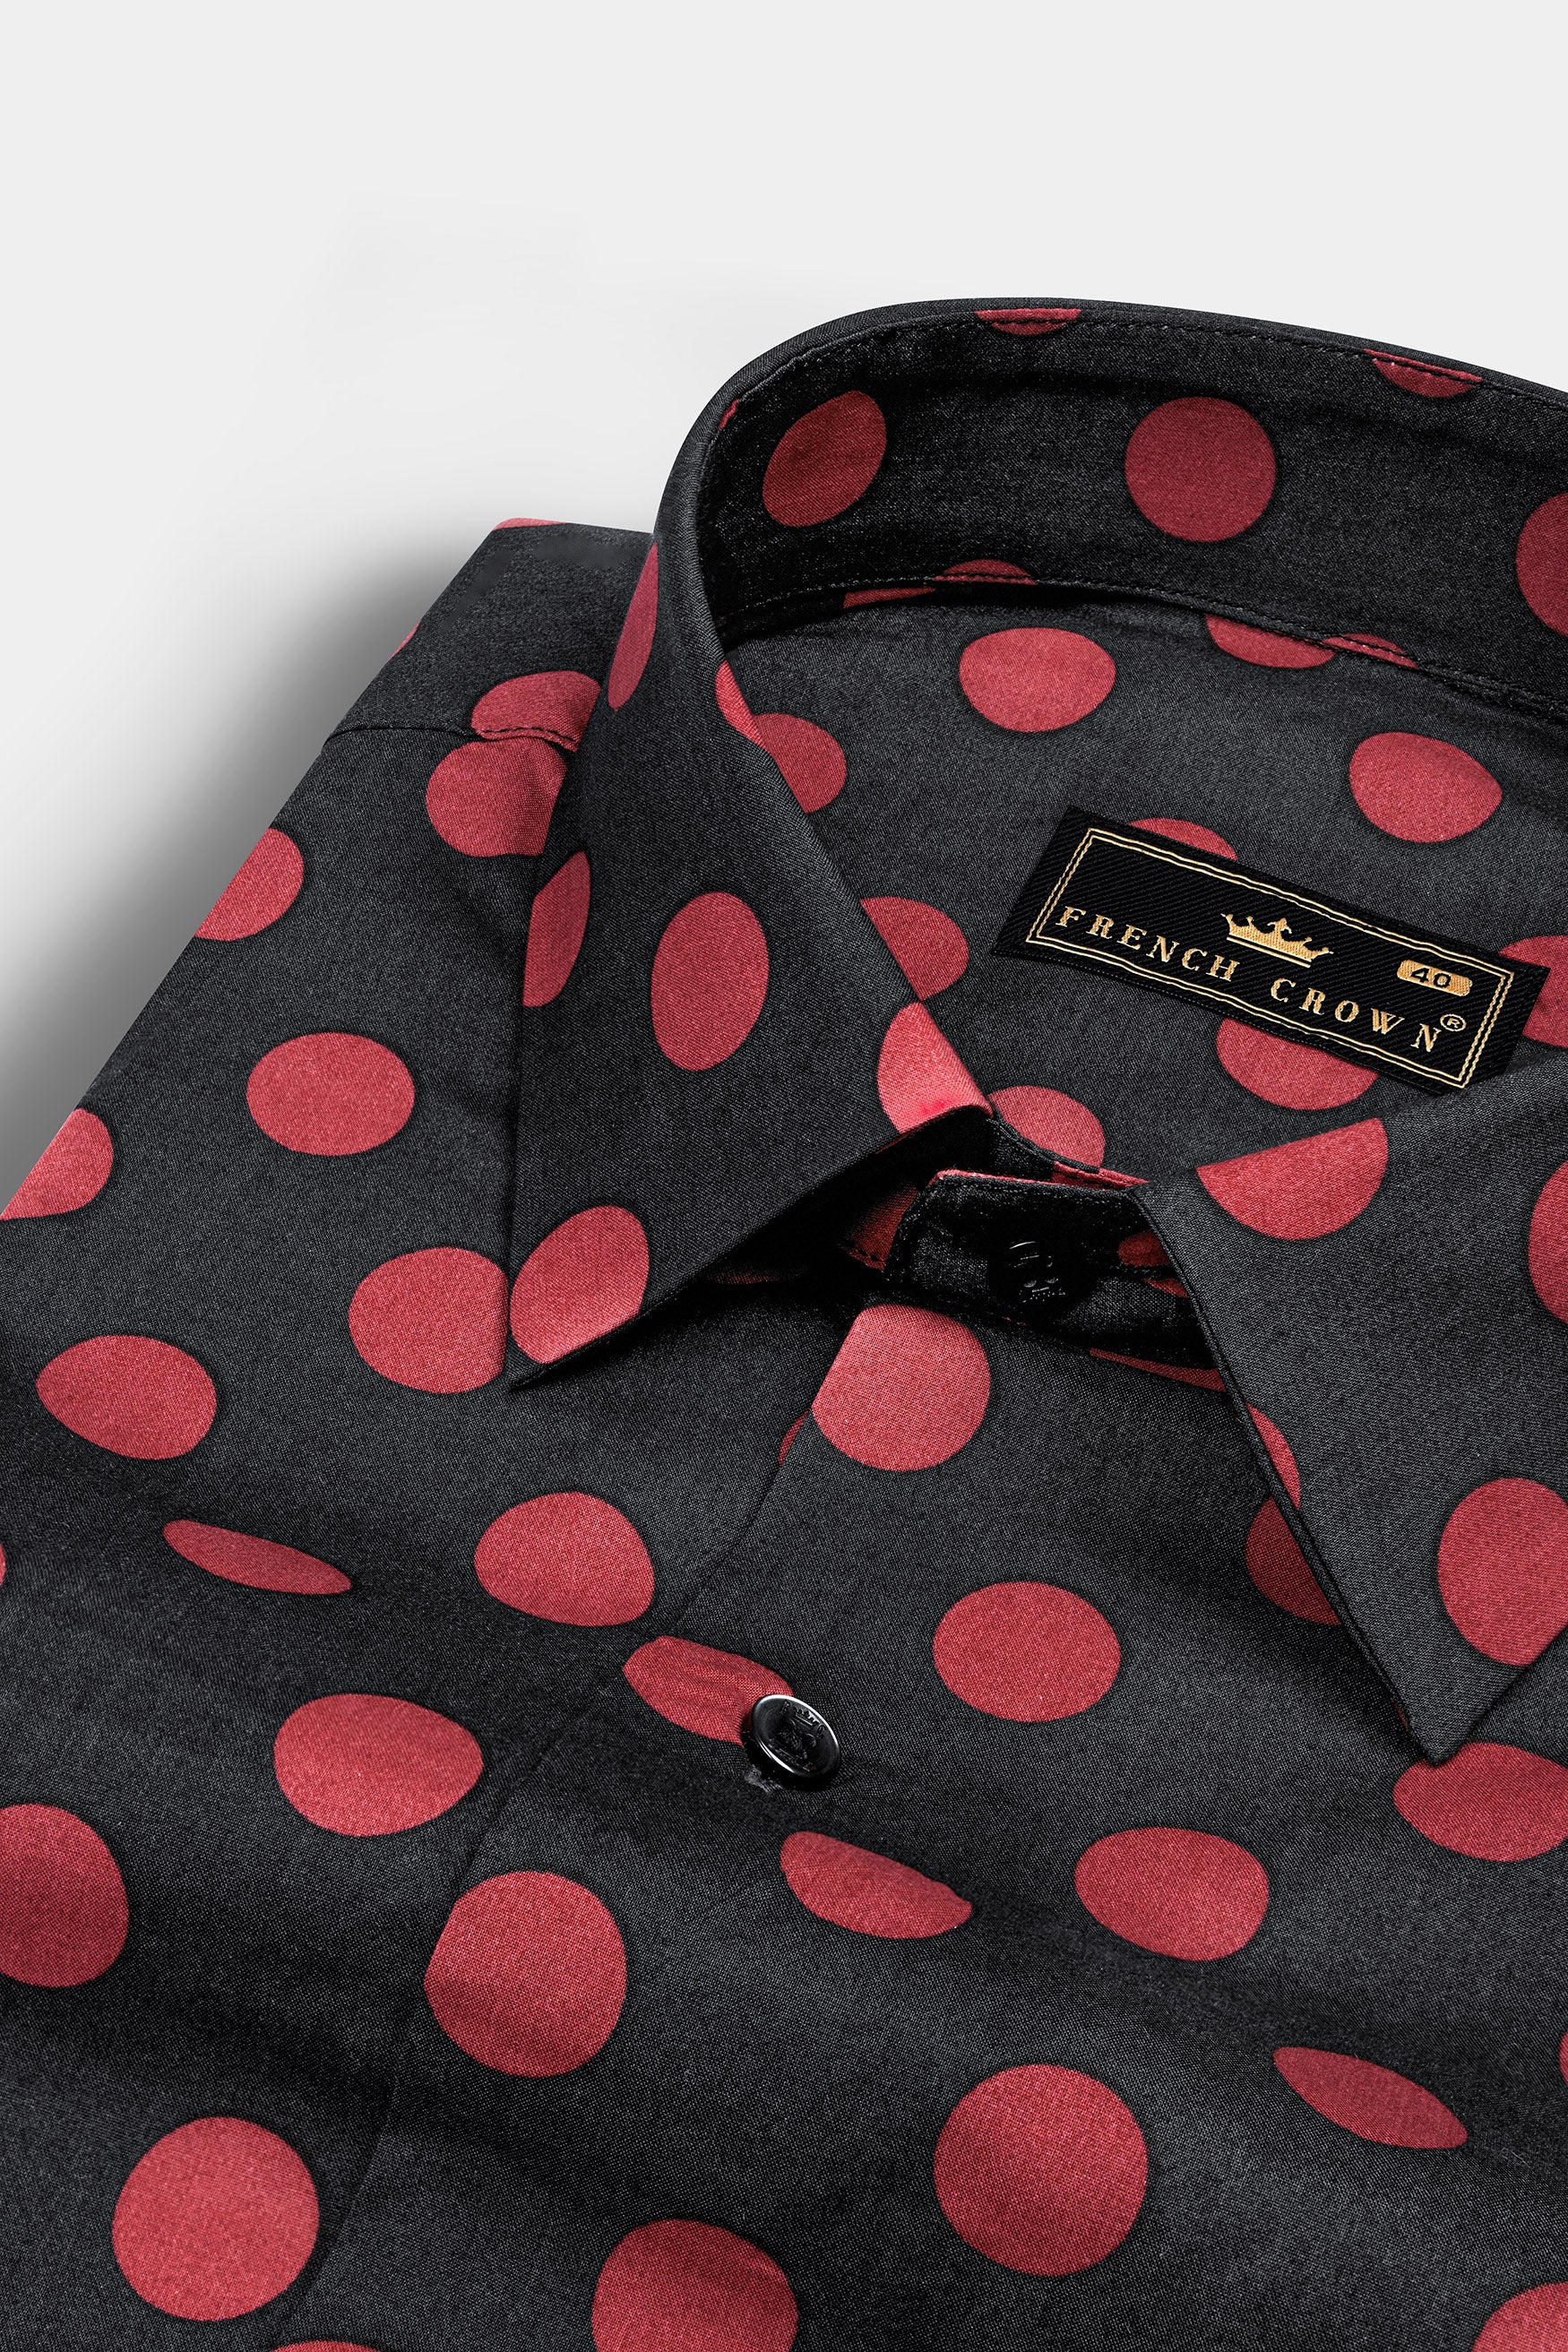 Charcoal Gray and Rose Red Polka Dotted Premium Cotton Shirt